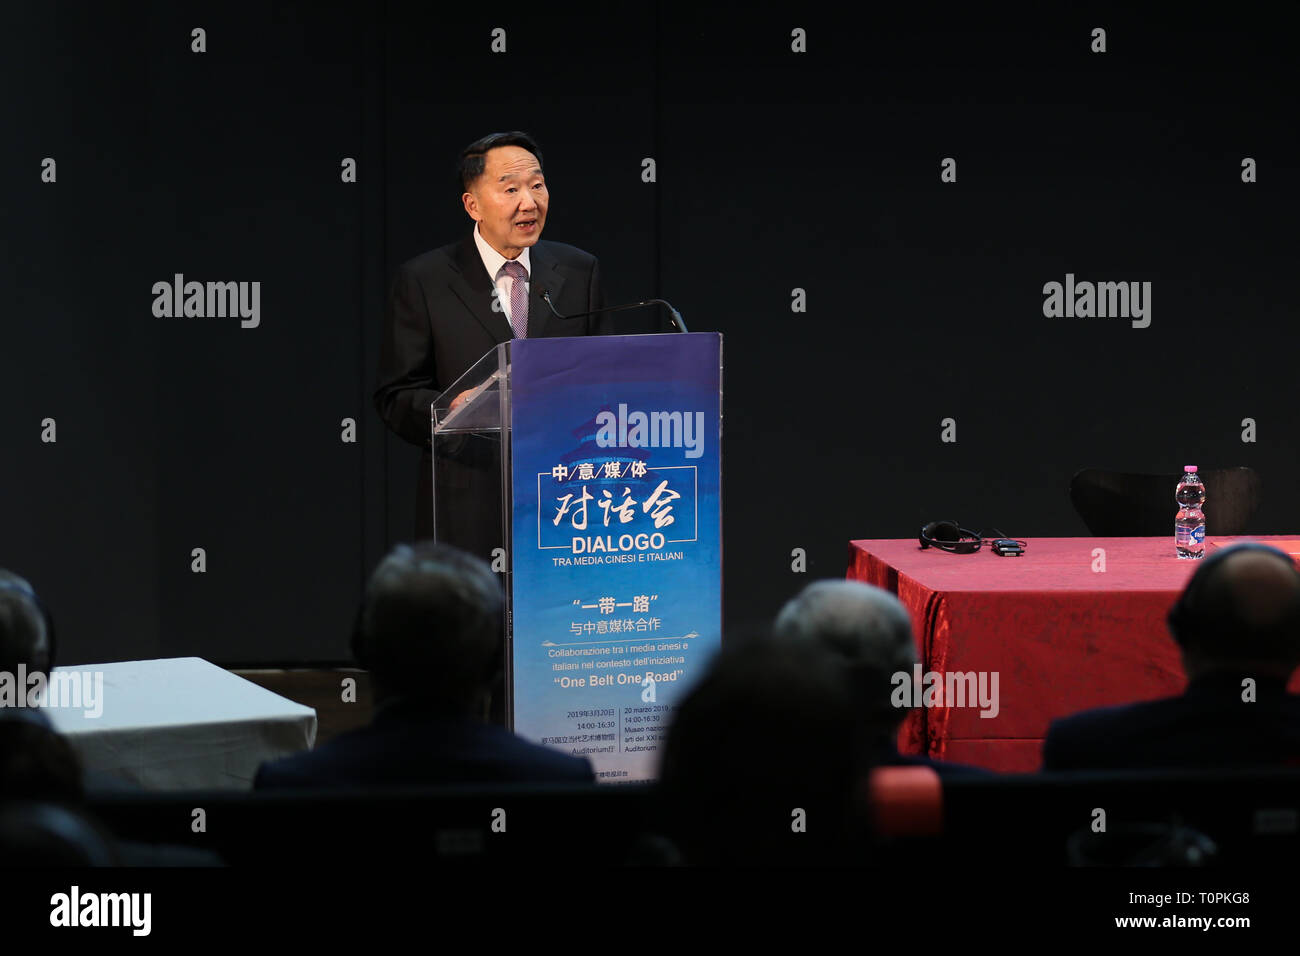 (190322) -- ROME, March 22, 2019 (Xinhua) -- Jiang Jianguo, deputy head of the Publicity Department of the Communist Party of China Central Committee, delivers a speech at a dialogue in Rome, Italy, March 20, 2019. Representatives of leading Chinese and Italian media pledged on Wednesday here to renew and expand collaboration to facilitate mutual understanding between the peoples and to promote bilateral ties. On the eve of Chinese President Xi Jinping's state visit to Italy, some 200 government officials, media executives, reporters and experts of the two countries participated in a dialog Stock Photo